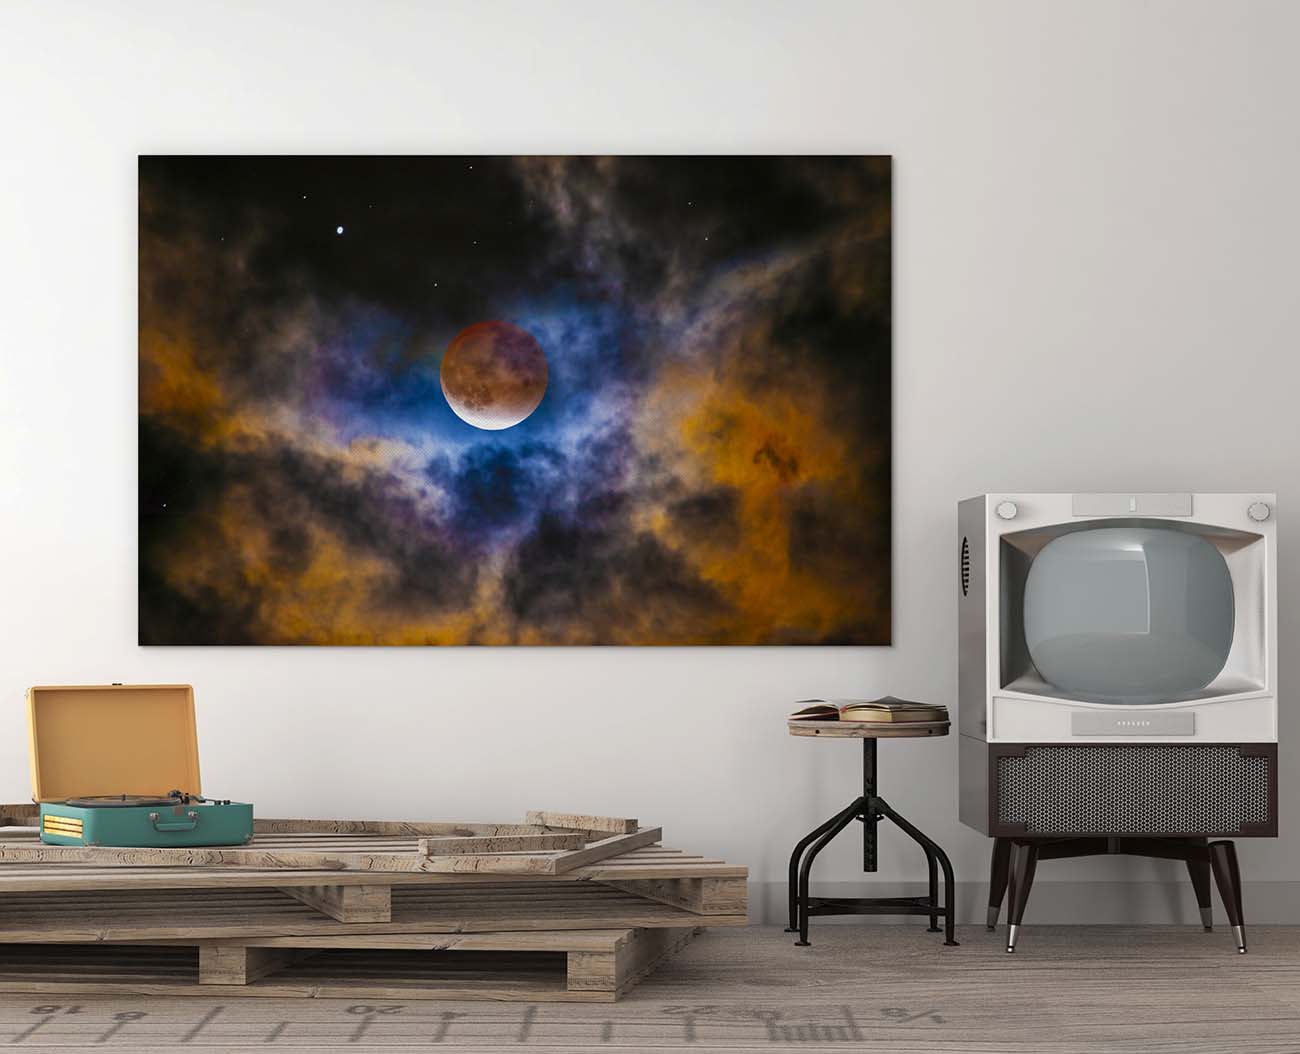 Blood Moon photograph by Doug LaRue large metal print on a wall next to a vintage television